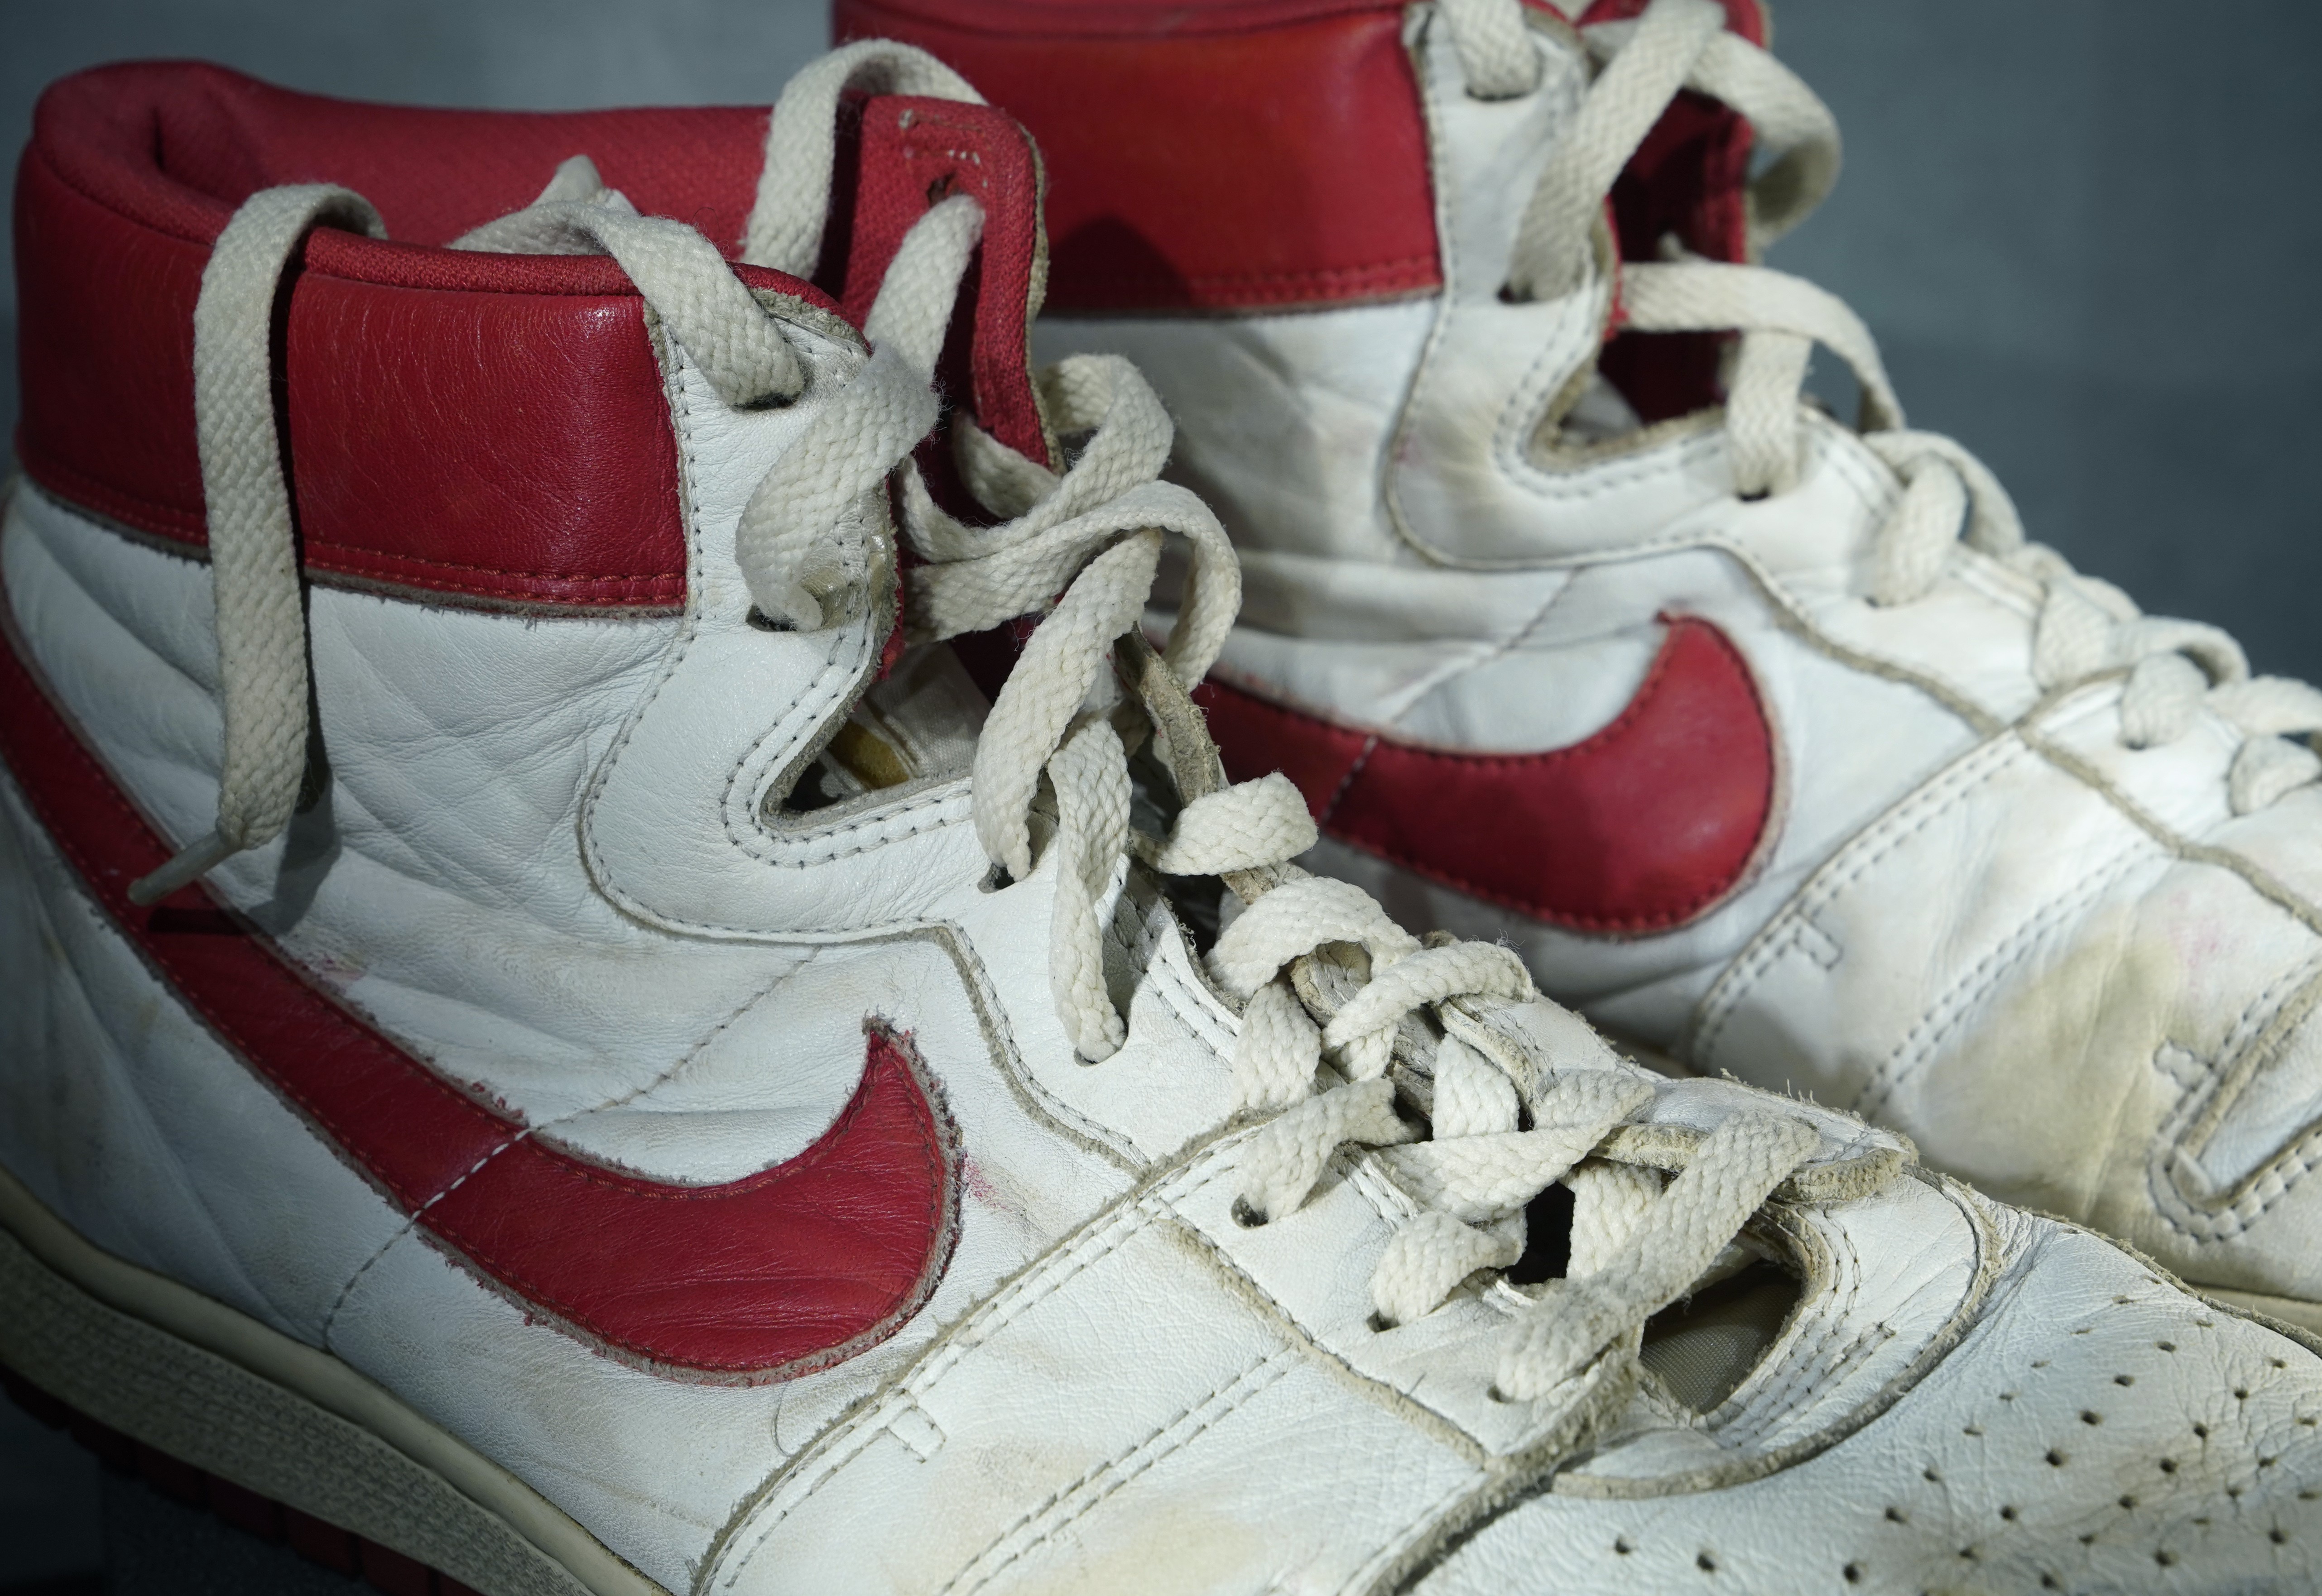 Rare Nike shoes worn by Michael Jordan during rookie season sell at auction for record $1.47 - oregonlive.com